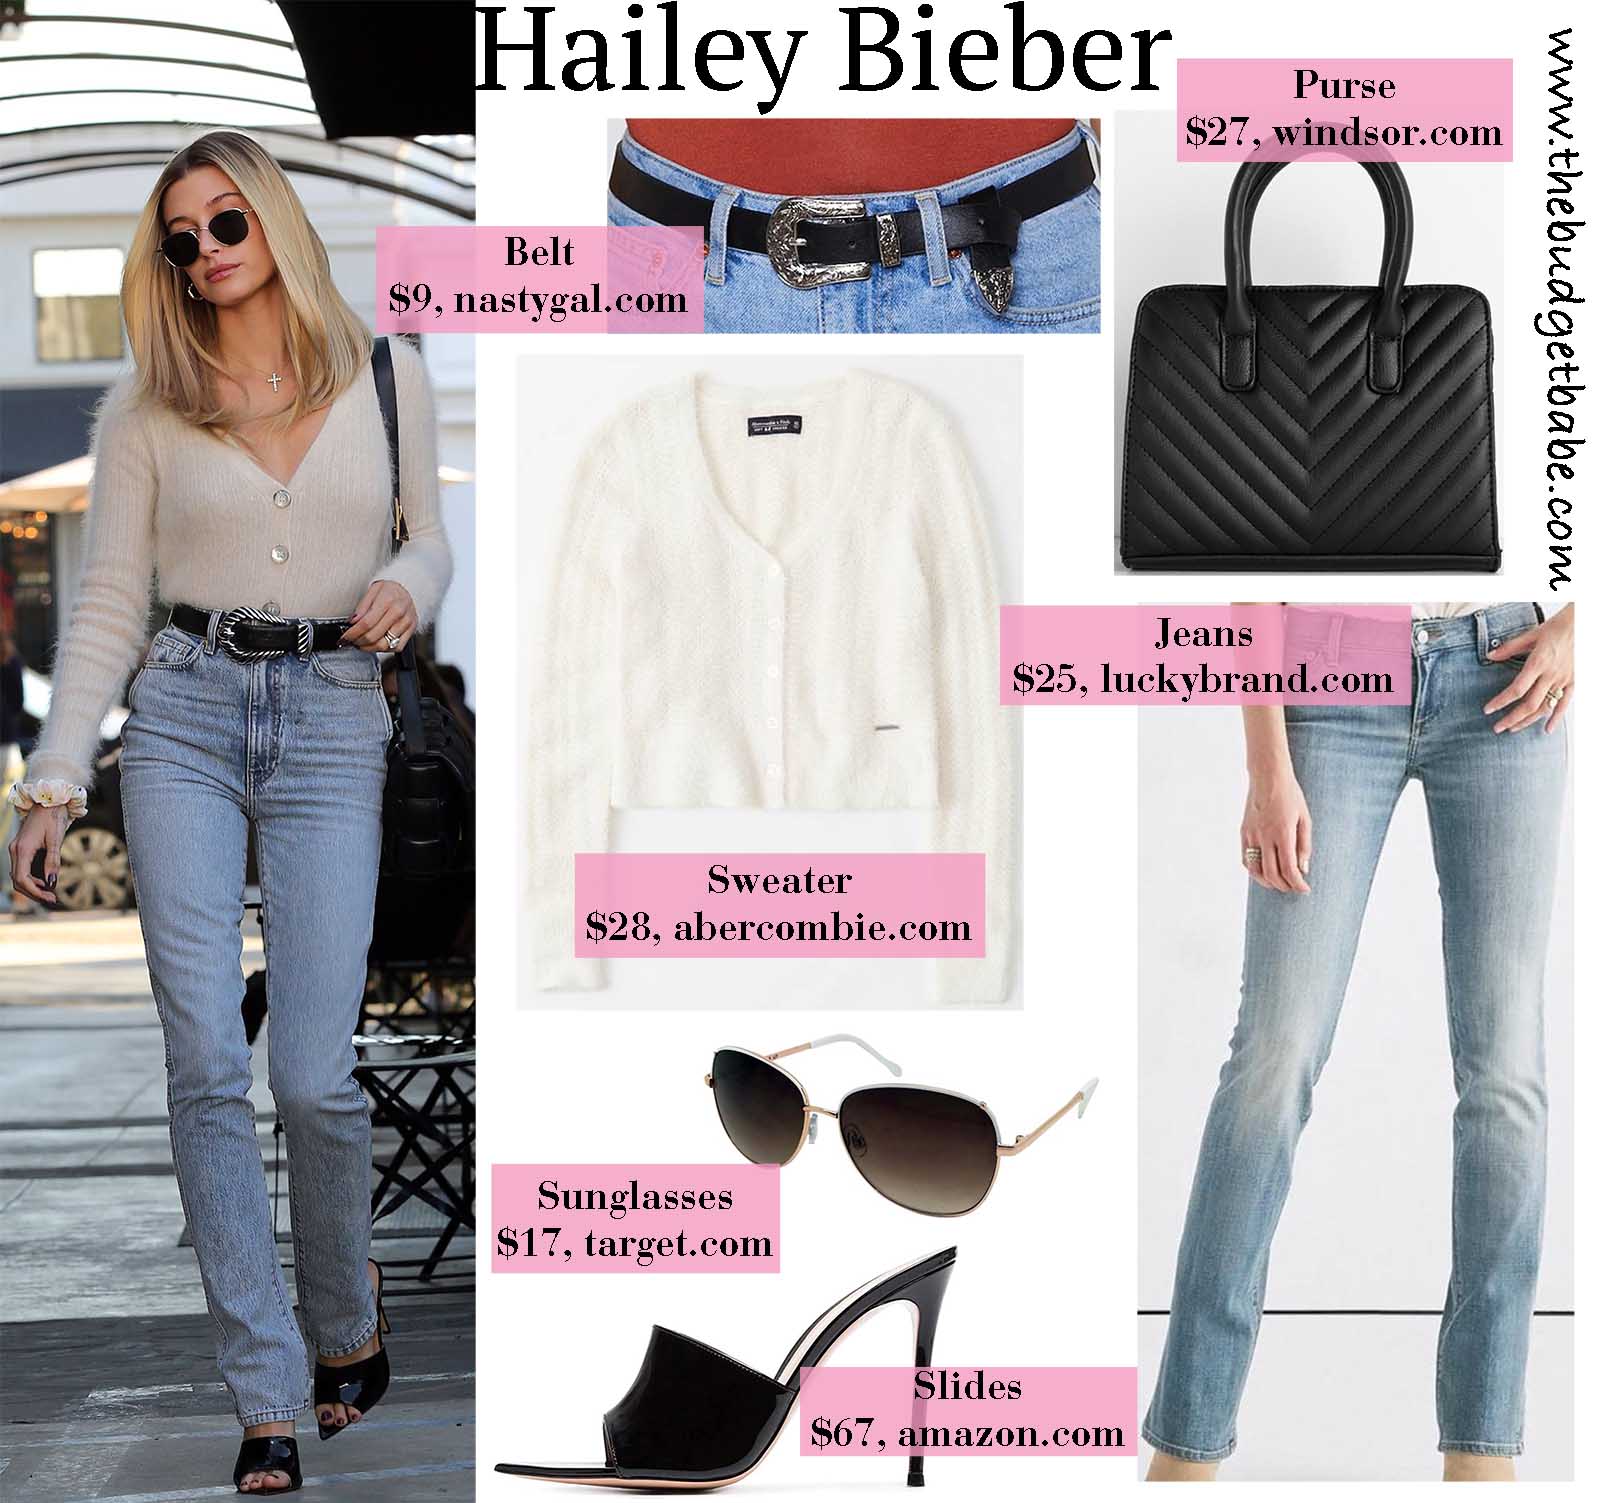 Hailey Bieber works an eyelash sweater and jeans beautifully!